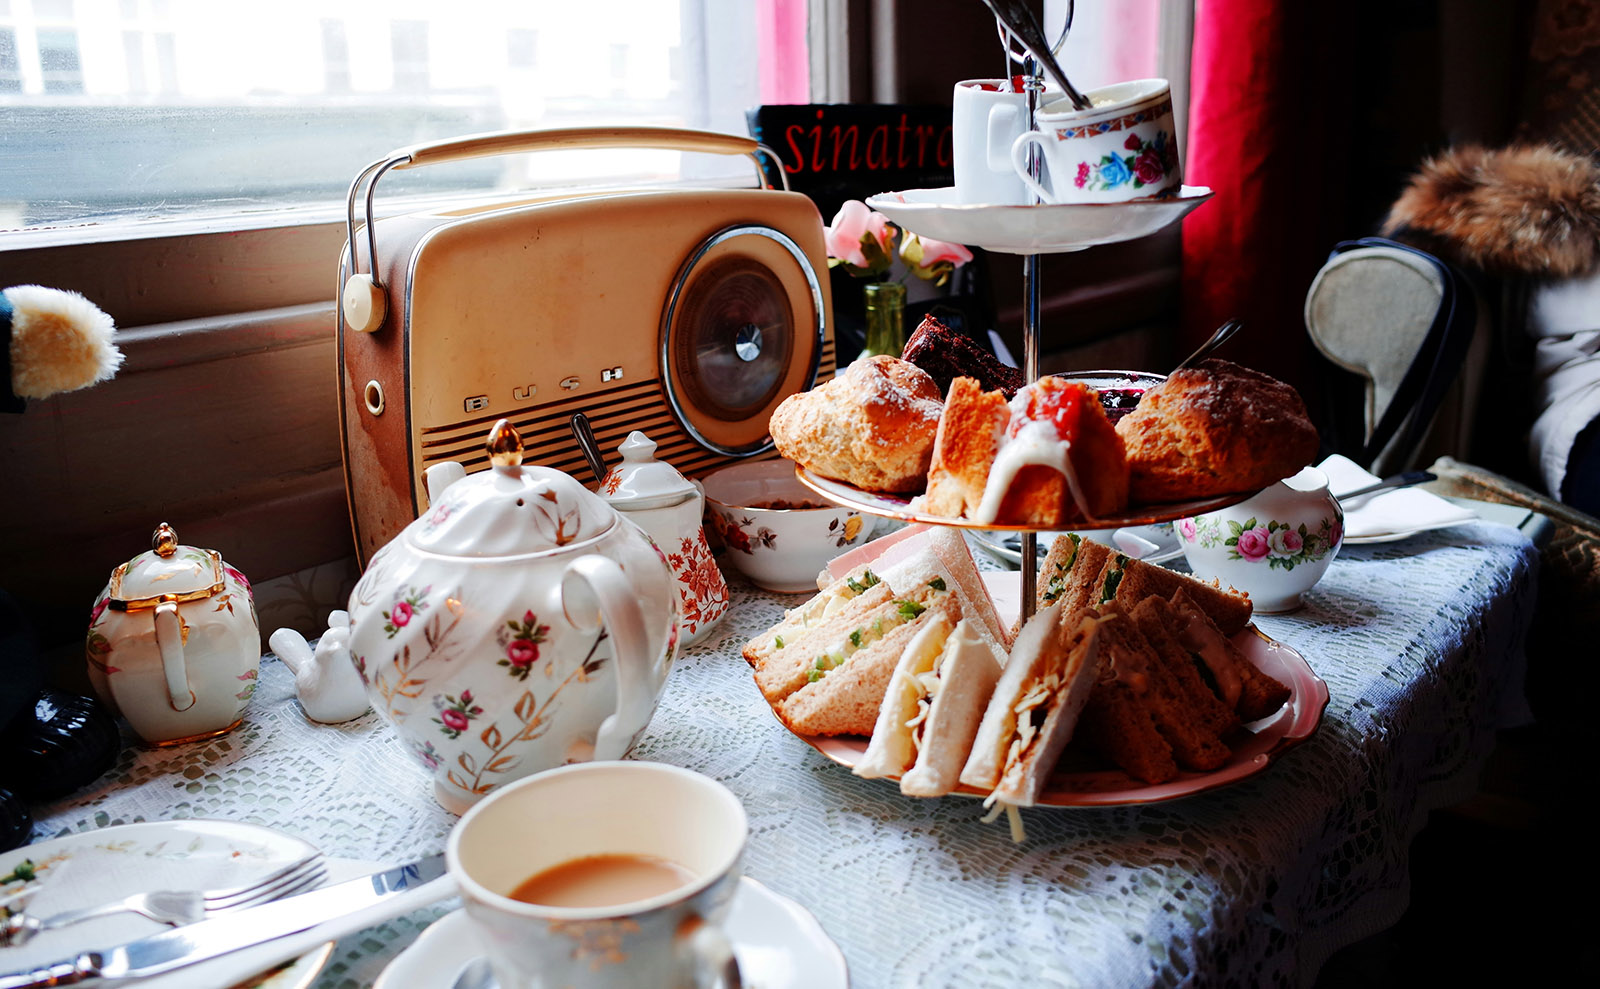 Afternoon Tea, Drive-In Theaters, Women Authors, Murdery Gardens & More: Endnotes 15 March